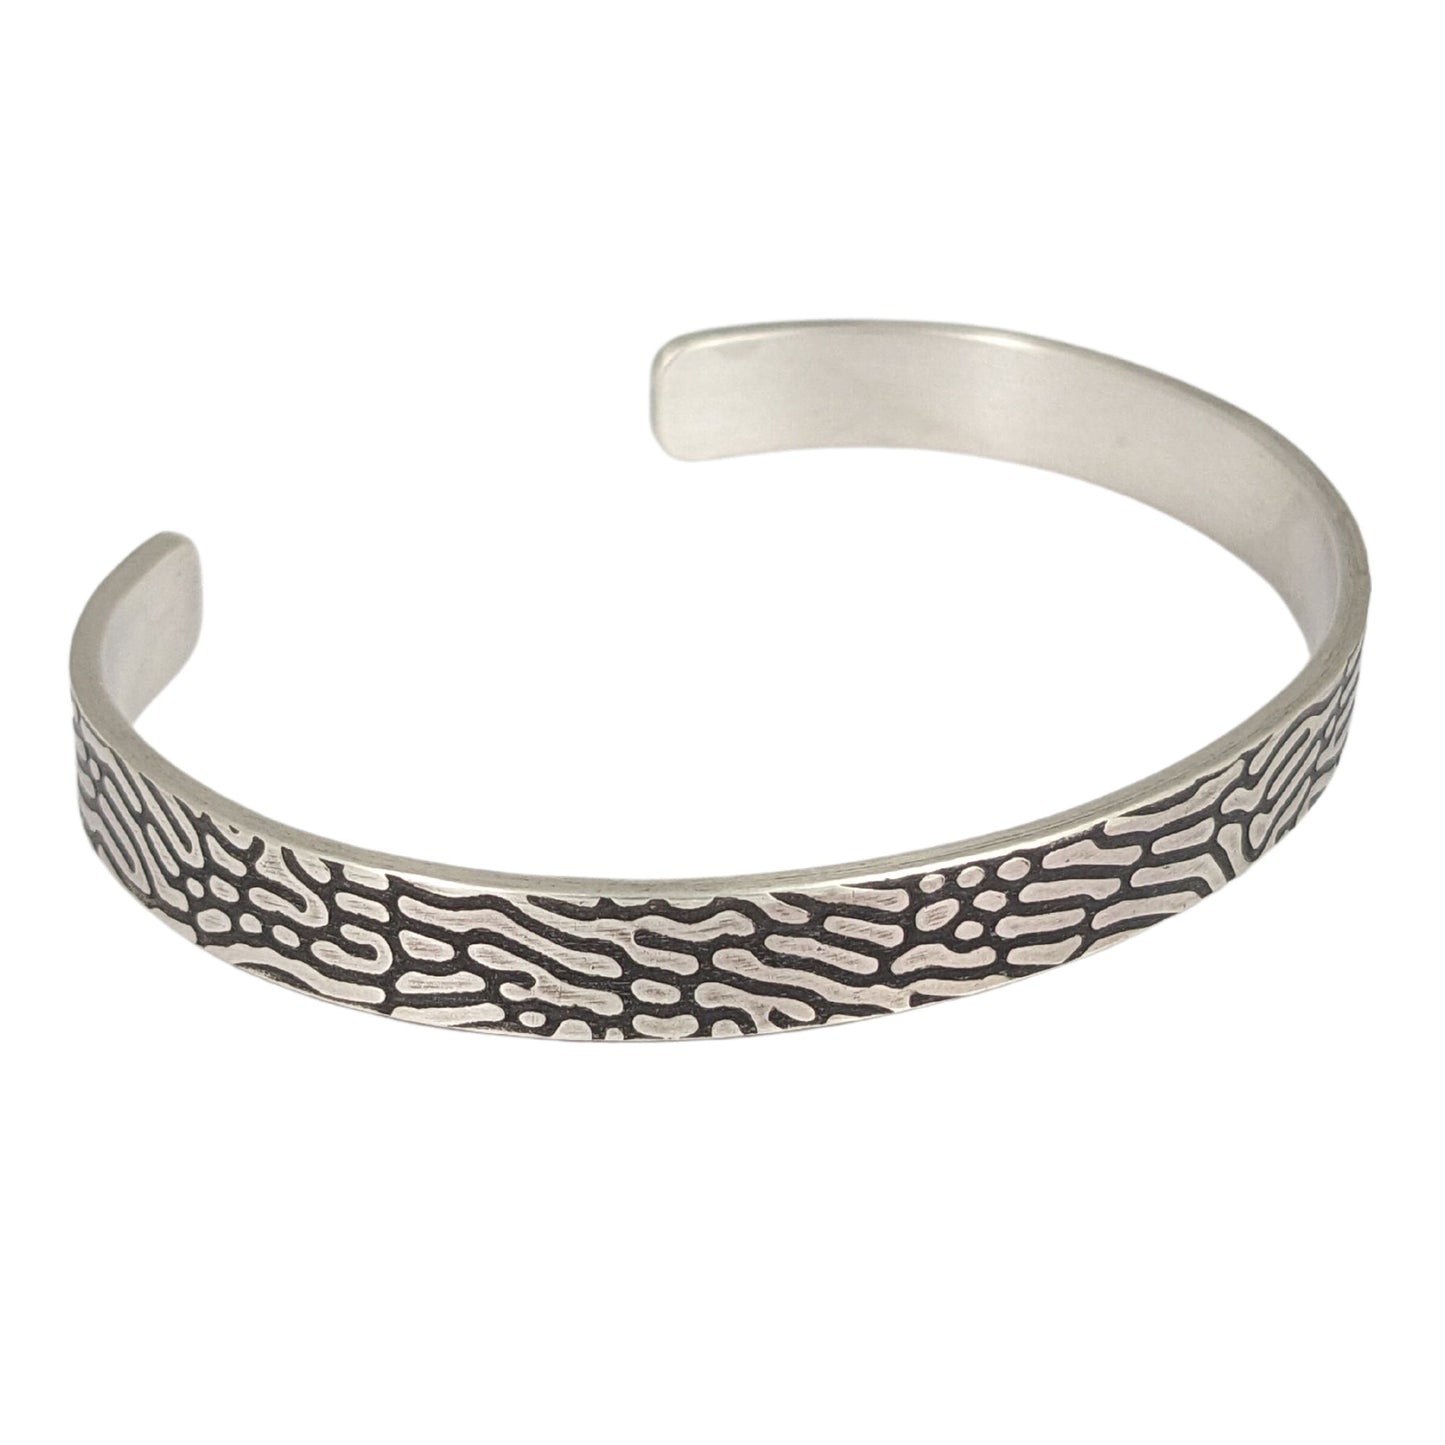 Rectangular shaped sterling silver wire cuff bracelet with an impressed design that looks like Brain Coral. The impressed design is darkened, so the coral lines are black against the silver.